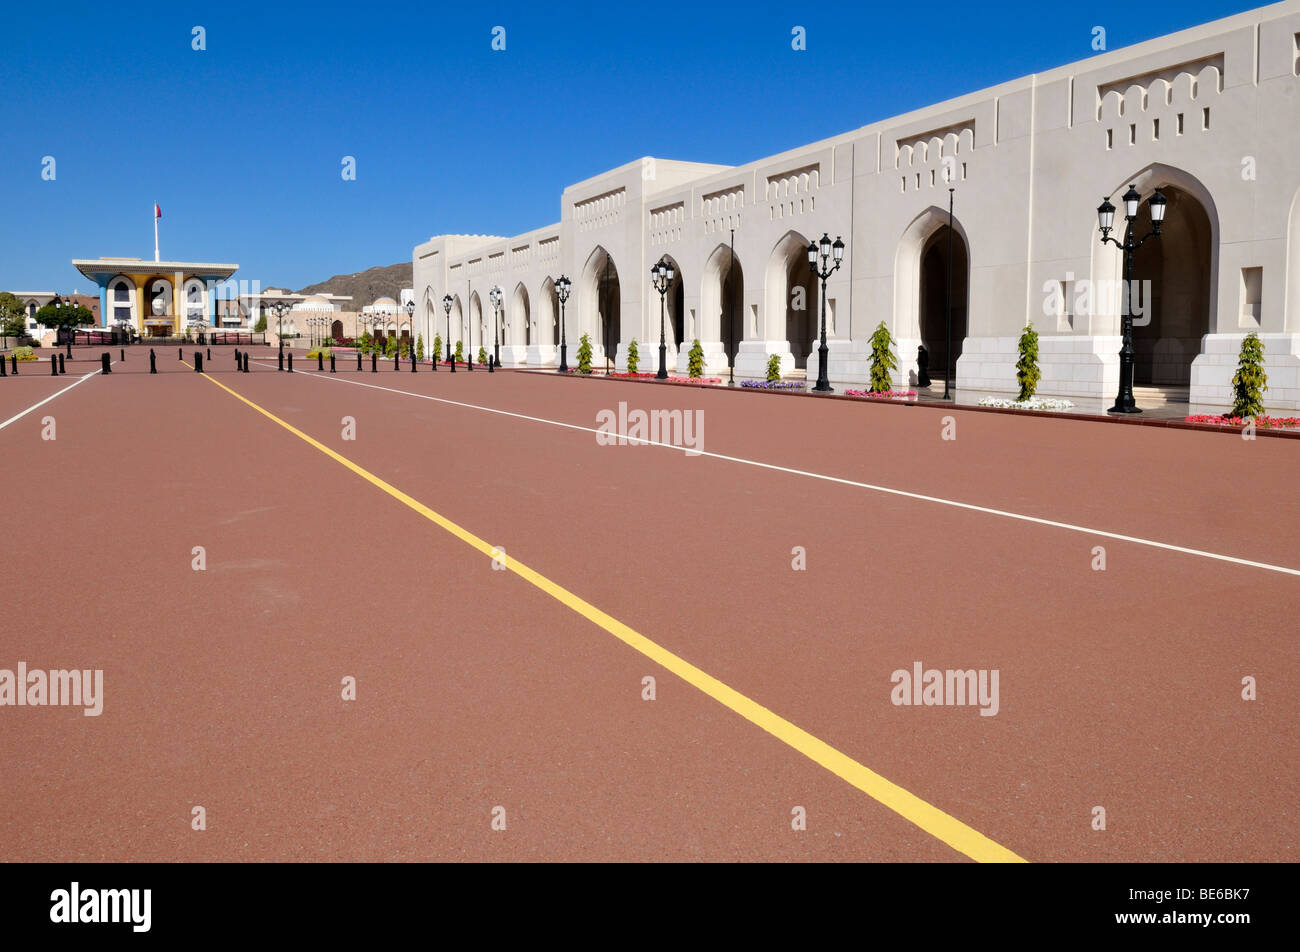 Al Alam Palace of Sultan Qaboos, Muscat, Sultanate of Oman, Arabia, Middle East Stock Photo